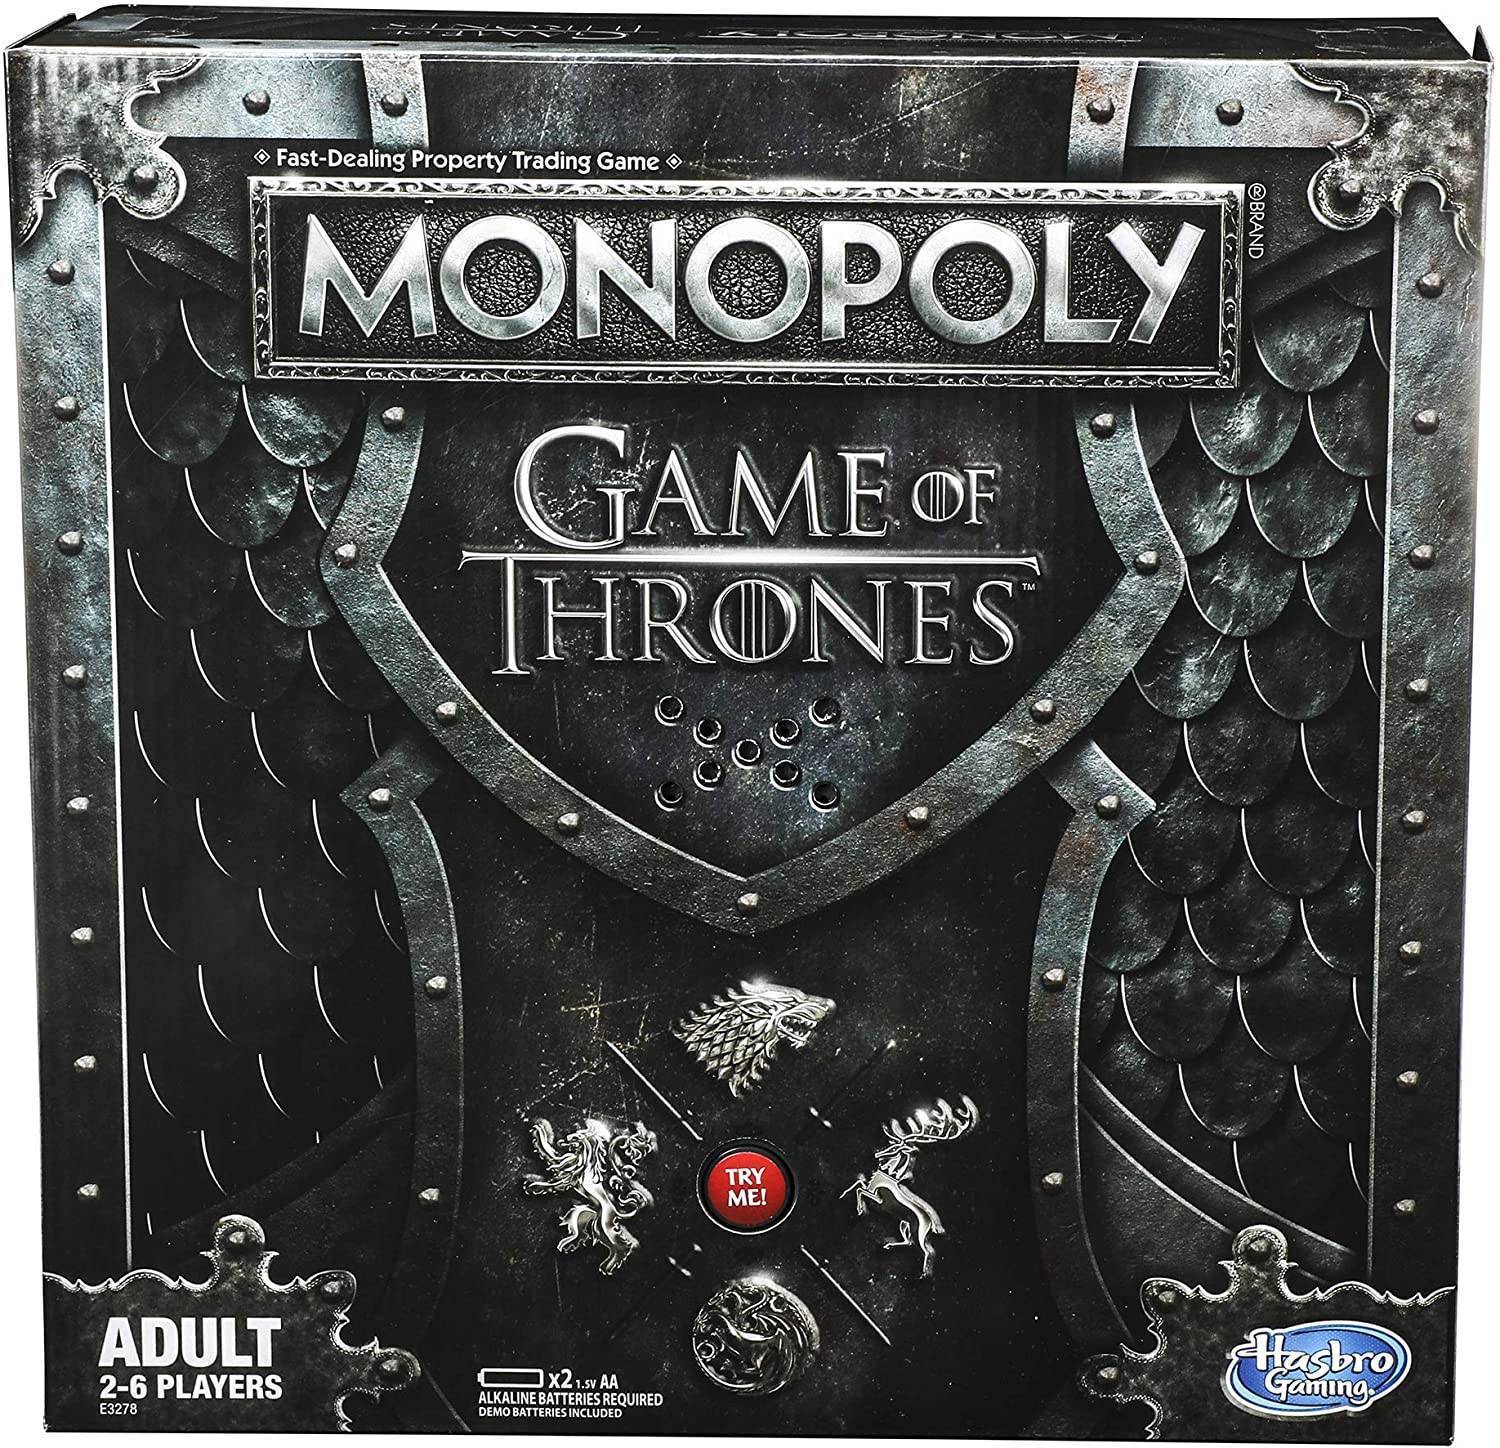 Monopoly boardgame game of thrones